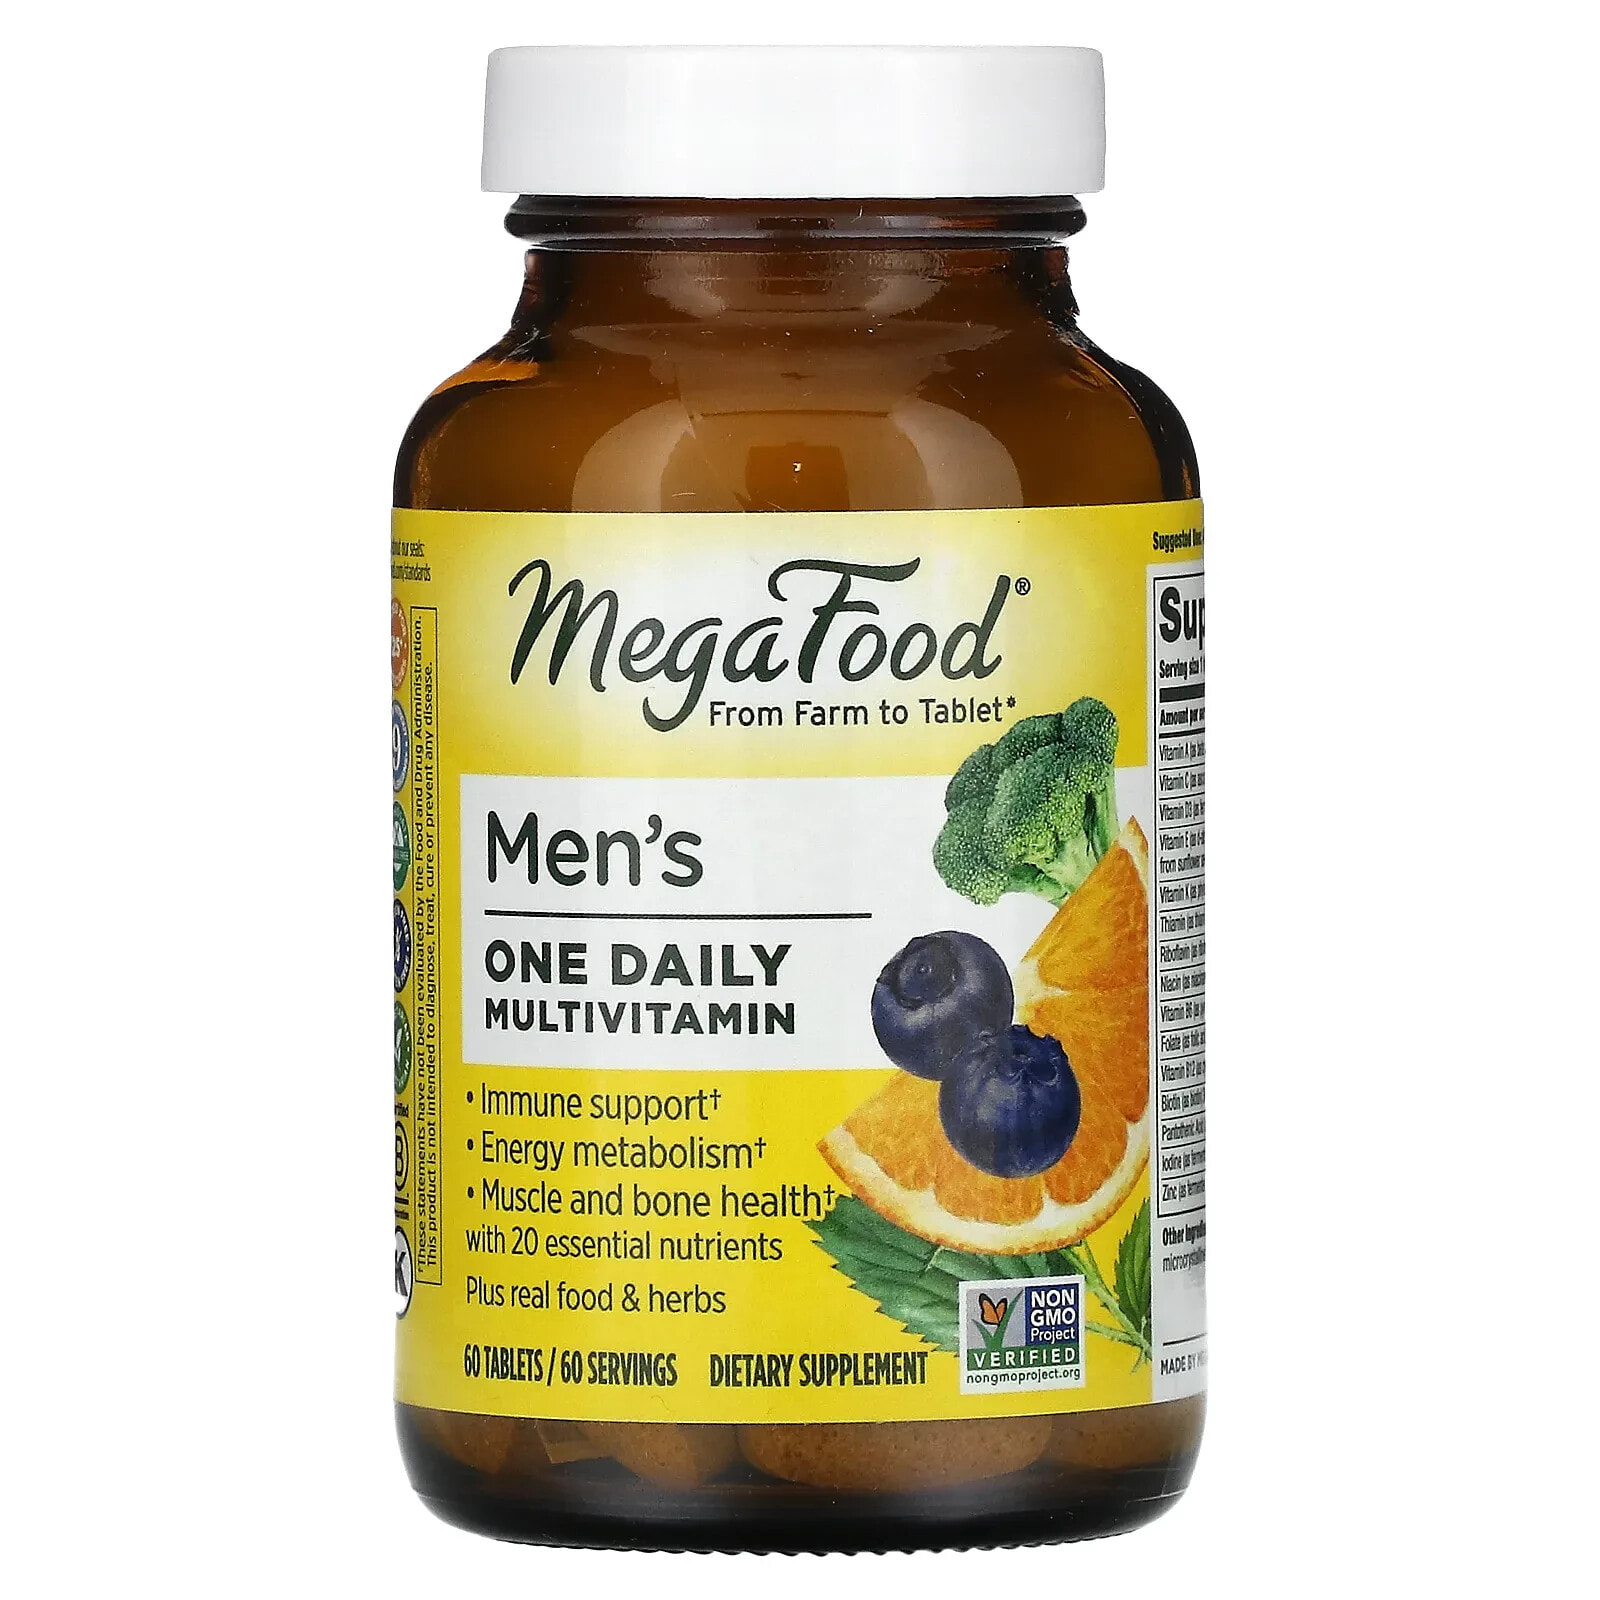 Men's One Daily Multivitamin, 90 Tablets